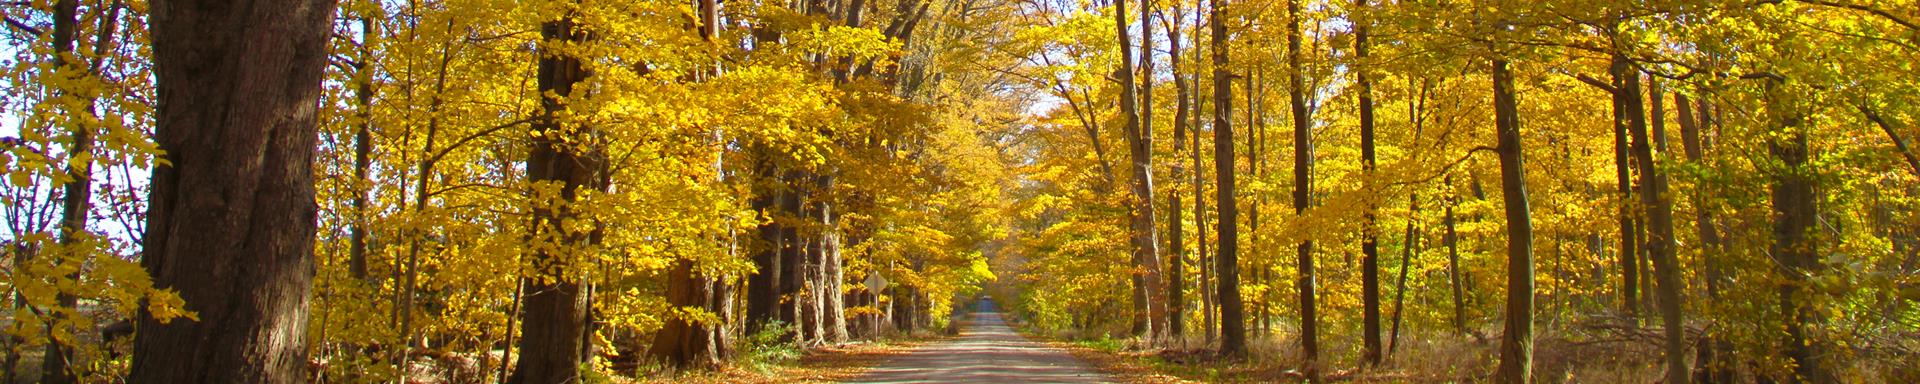 Image of a rural fall road in Chatham-Kent